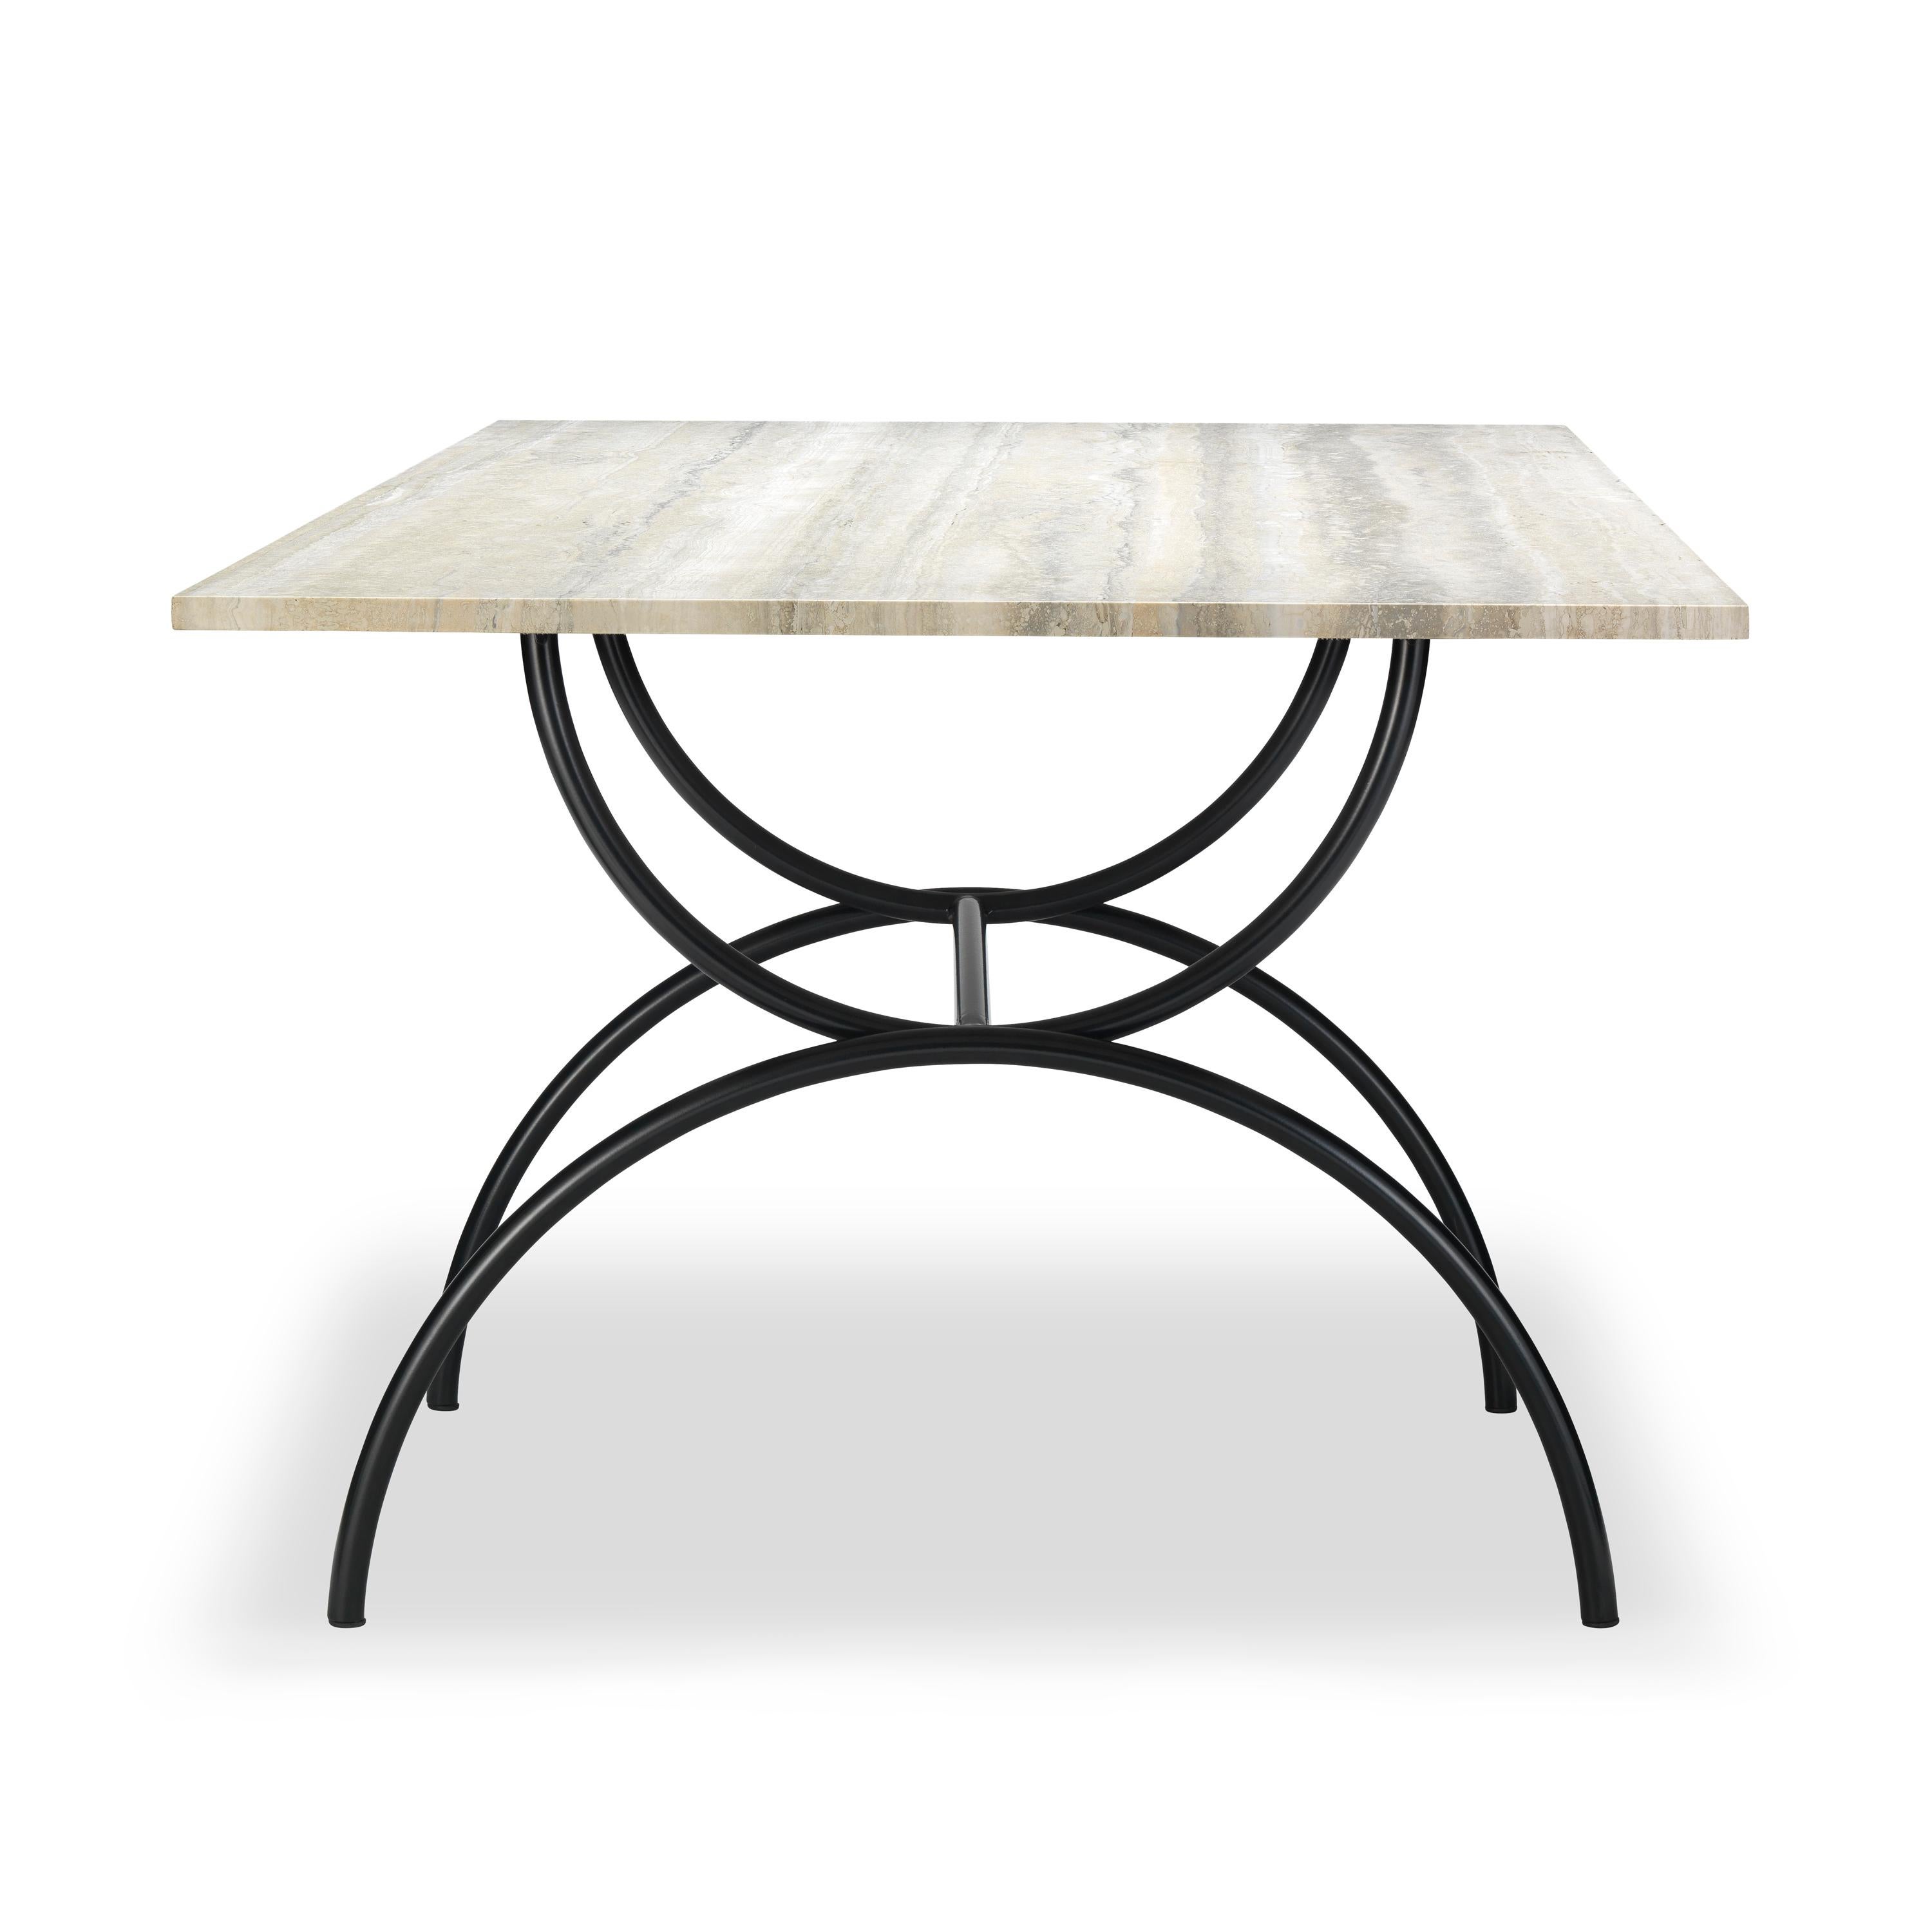 Ten10 Pompeii dining table with a stainless steel base powder coated black and a vein cut filled honed travertine 3/4